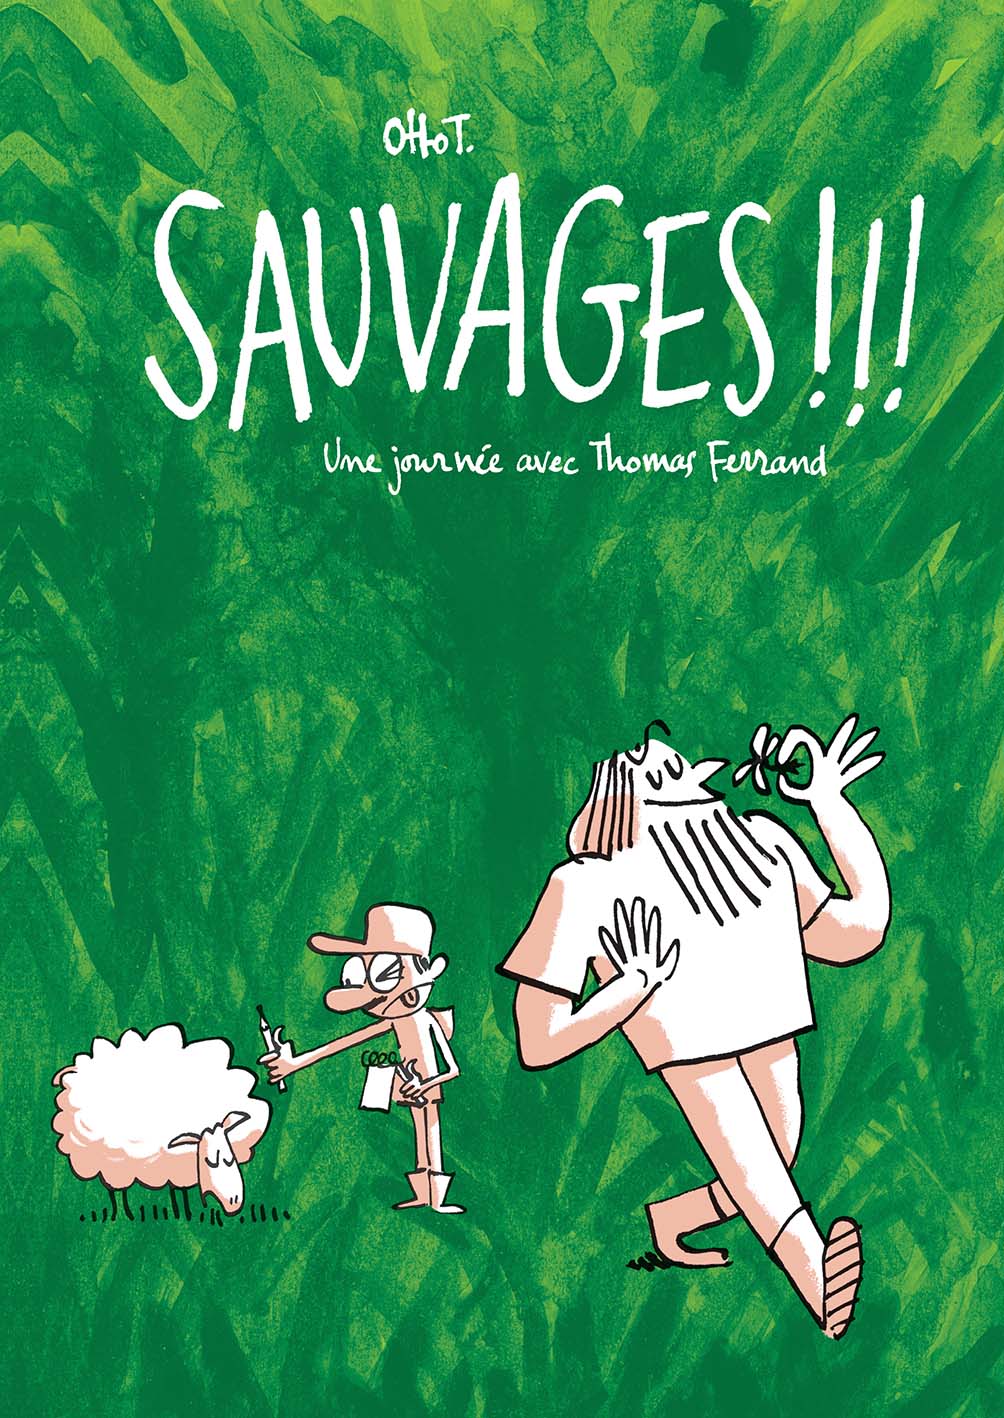 Sauvages !!! d'Otto T.